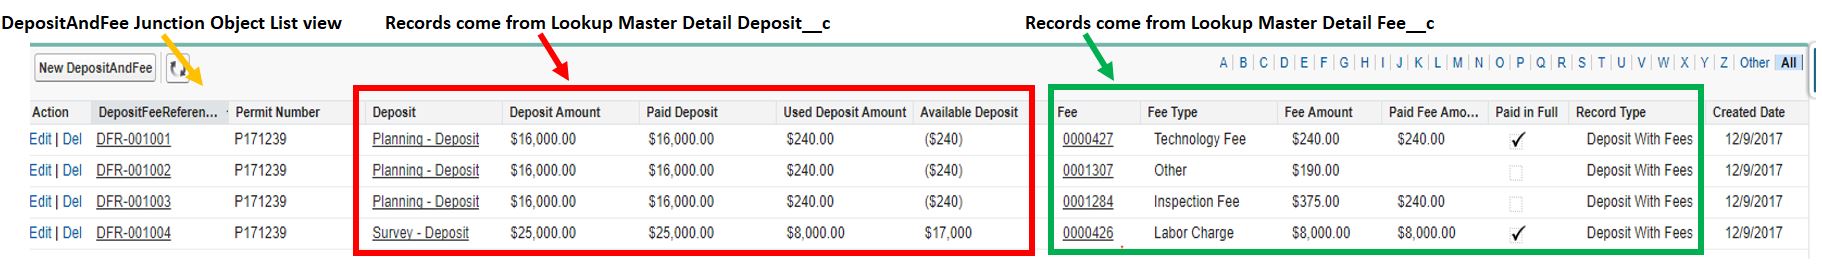 Deposit and Fee list view